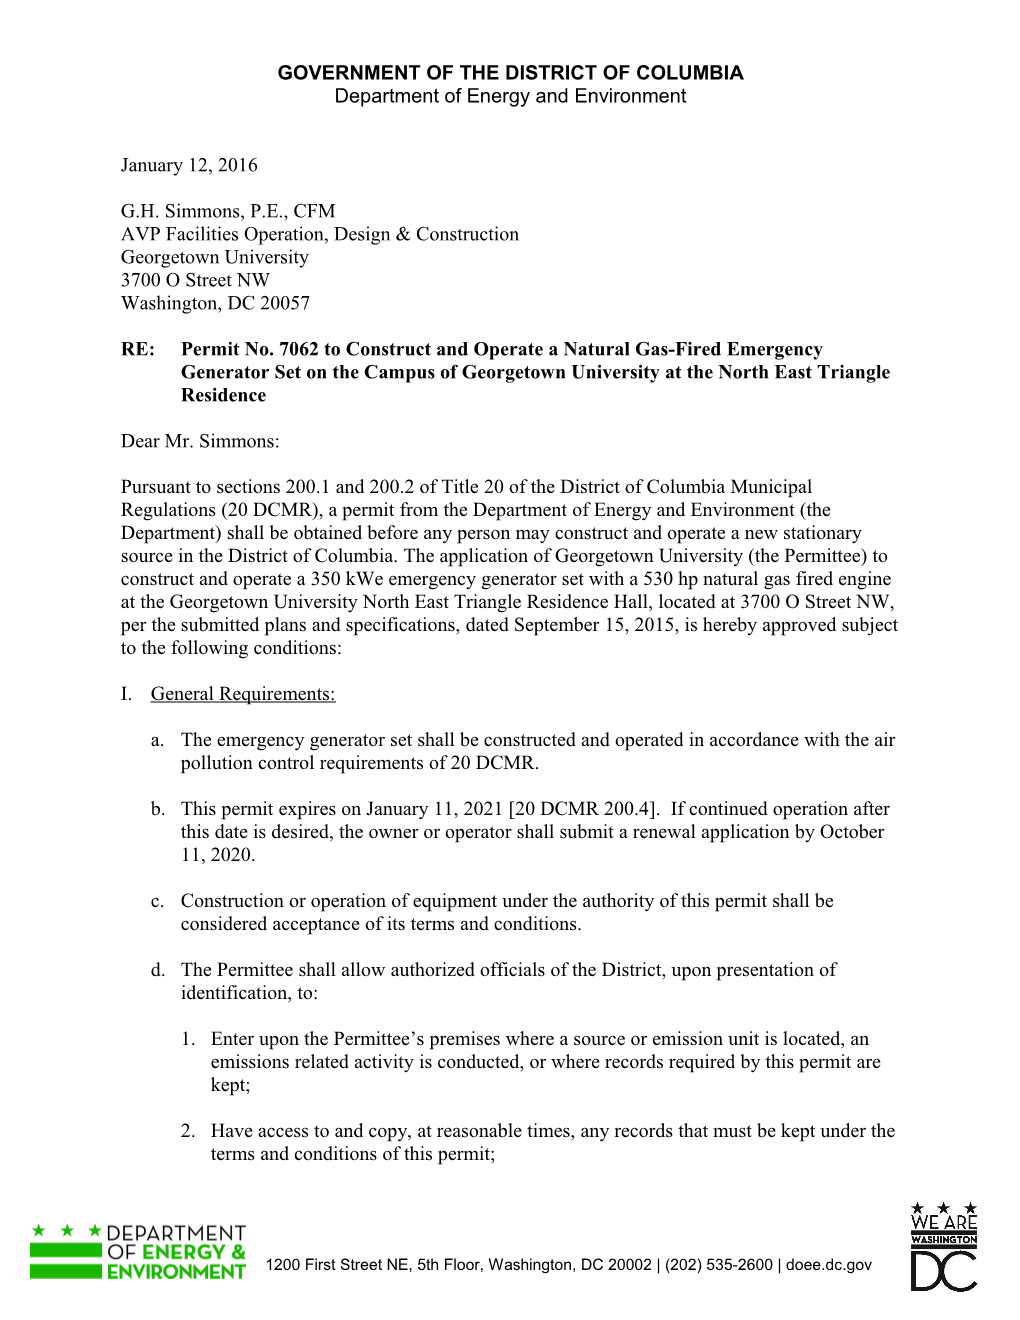 Permit No. 7062 to Construct and Operate a Natural Gas-Fired Emergency Generator